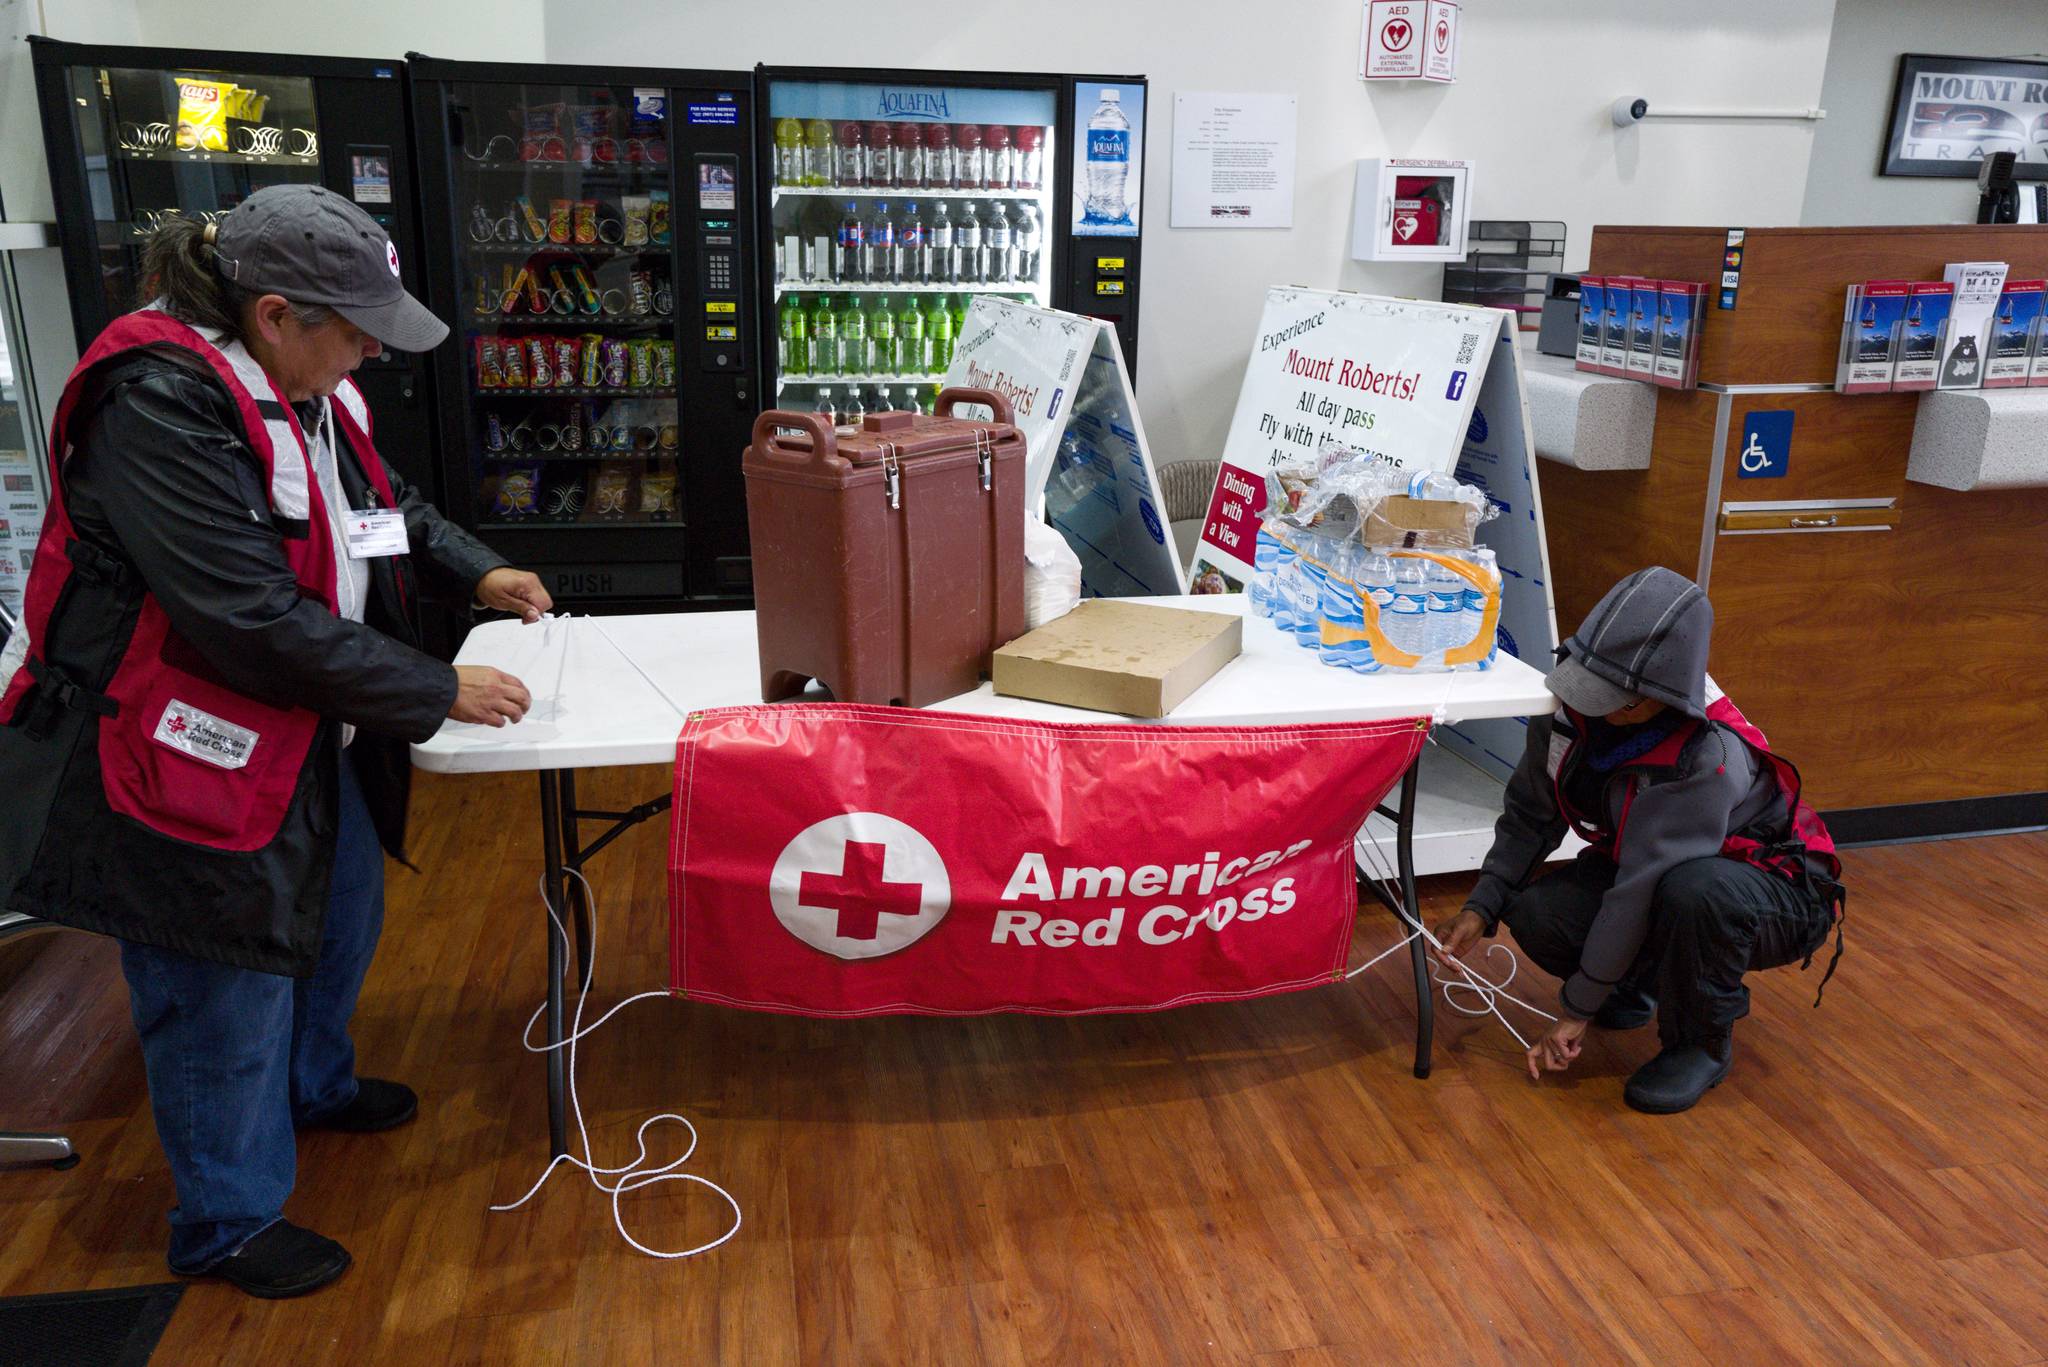 Ralphenia Knudson, left, and Carolyn Garcia, of the American Red Cross, set up a table at the Mount Roberts Tramway as rescuers gather to find a lost hiker on Mount Roberts on Friday, Sept. 20, 2019. (Michael Penn | Juneau Empire)